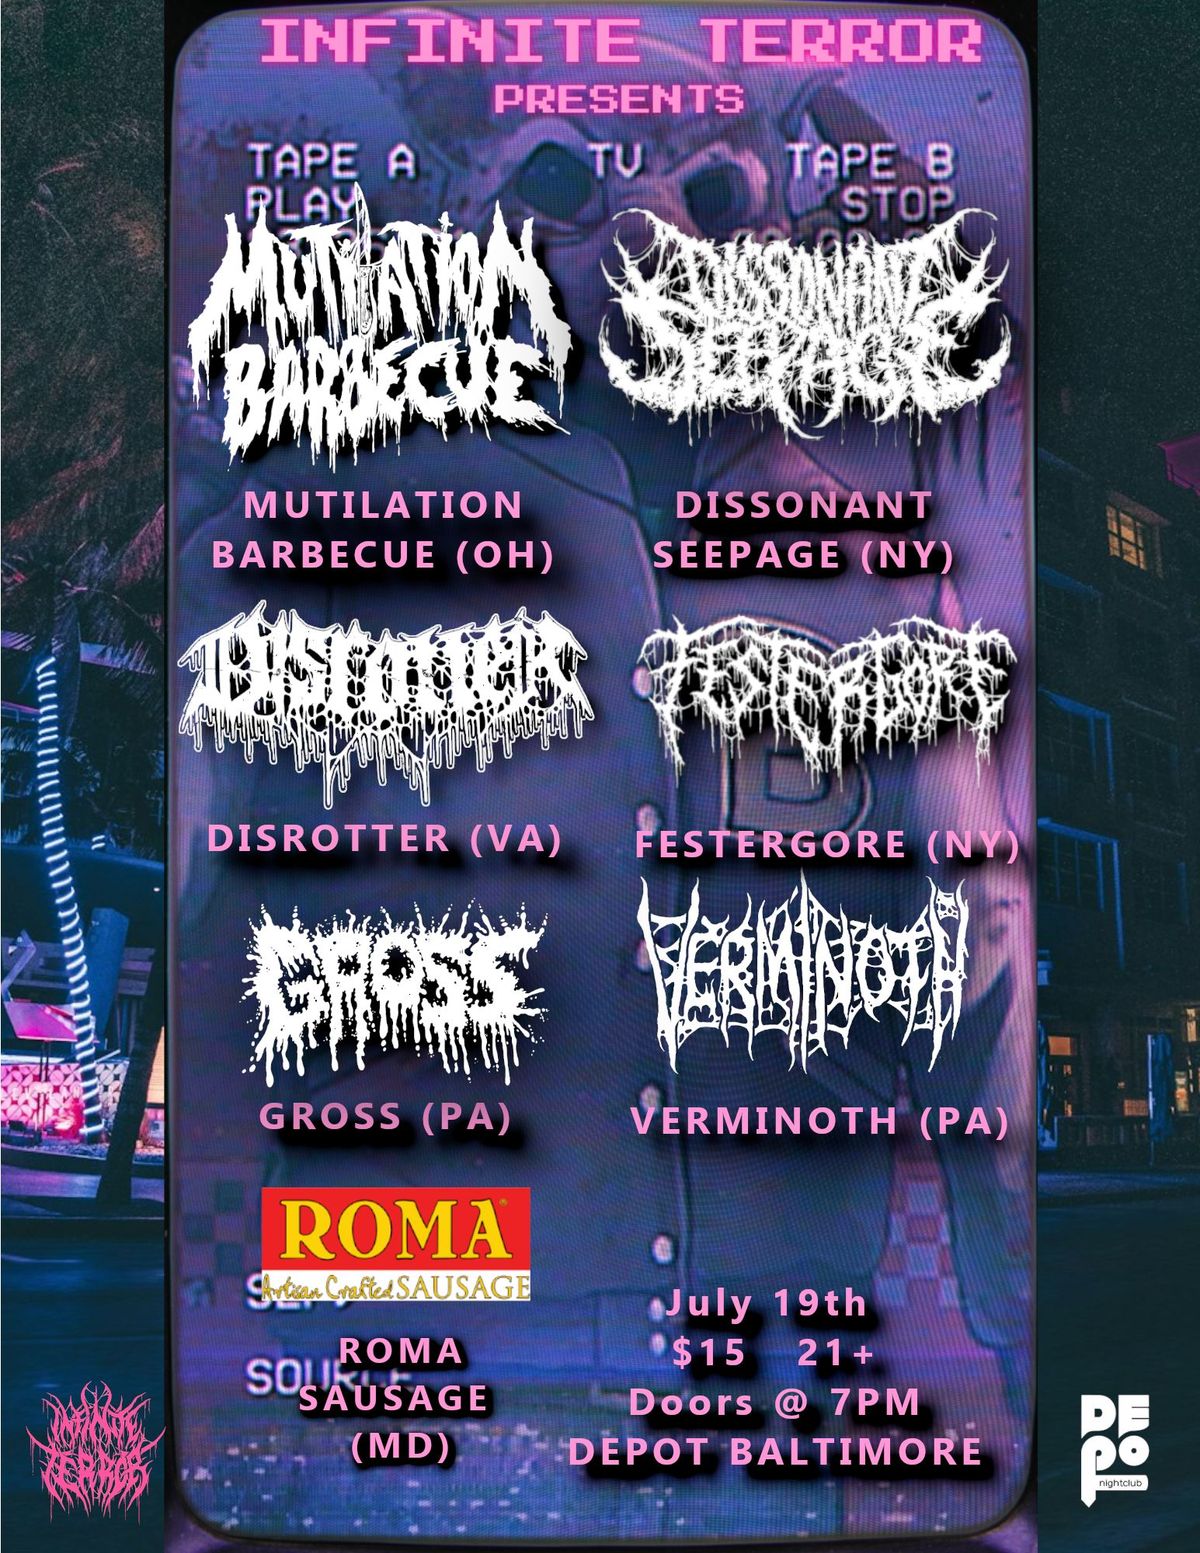 Mutilation Barbecue, Dissonant Seepage, Disrotter, Festergore, Gross, and Verminoth